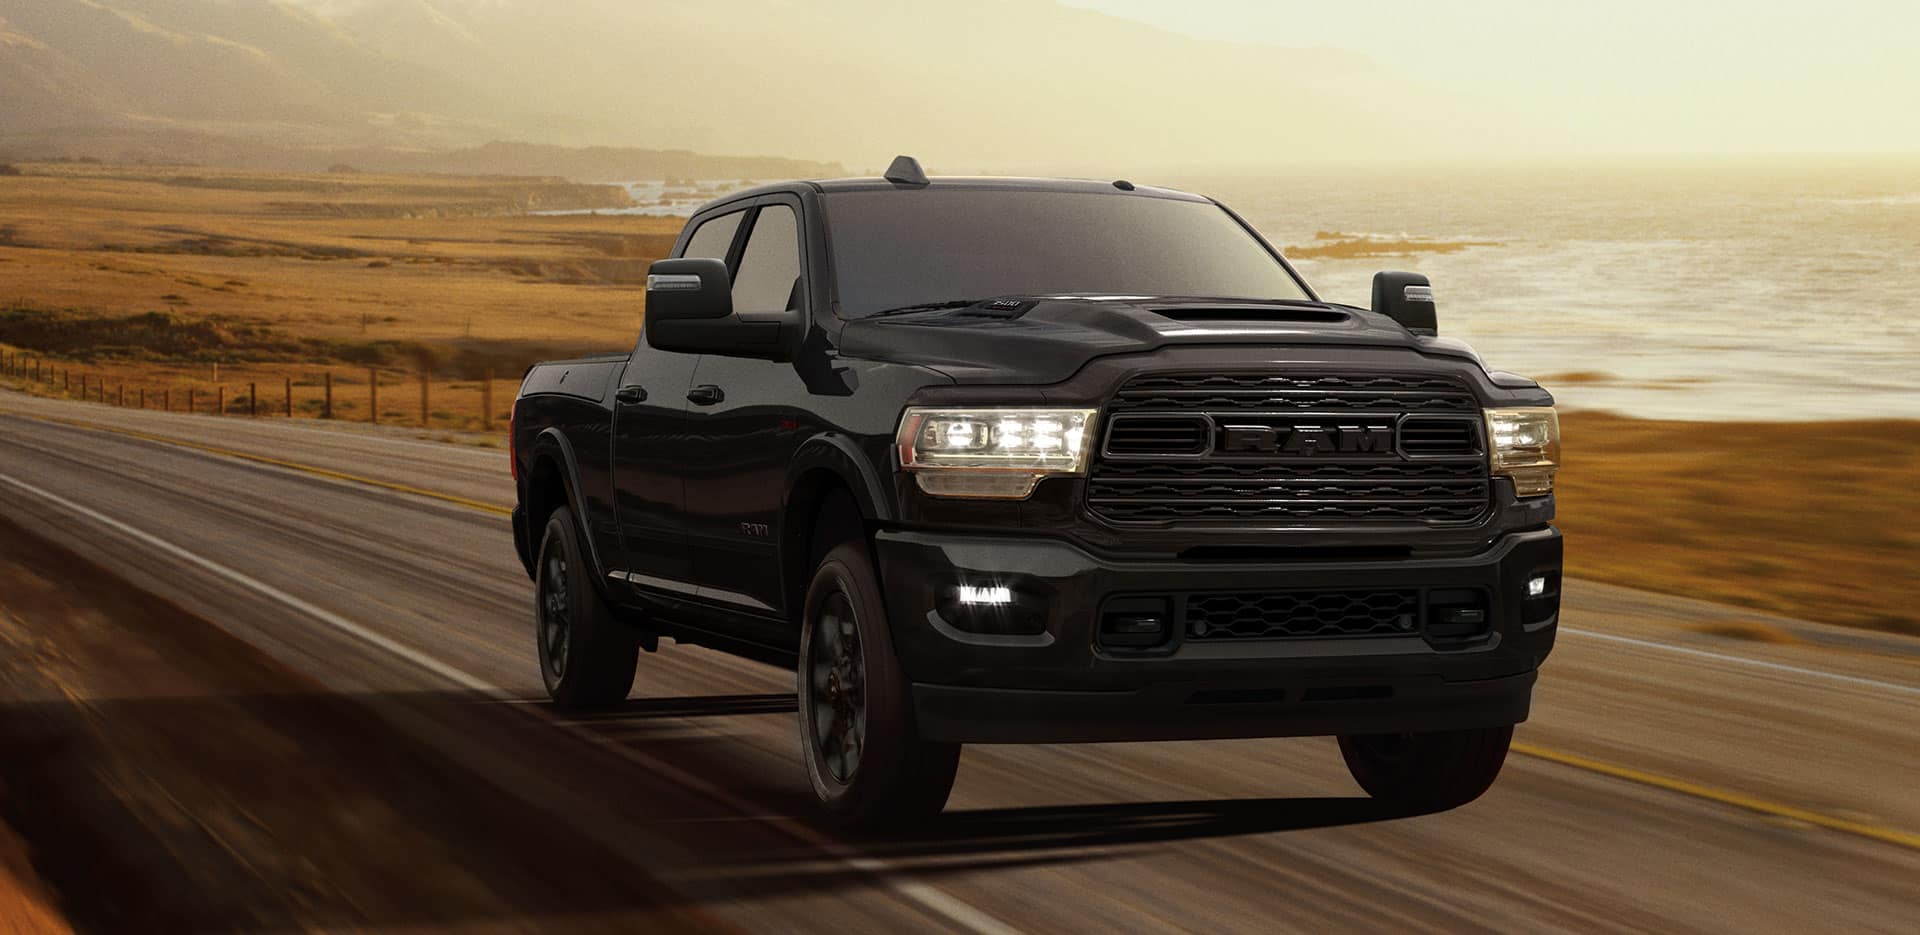 Display A 2023 Ram 3500 Limited Crew Cab with its headlamps on, being driven on a waterfront highway at dusk.